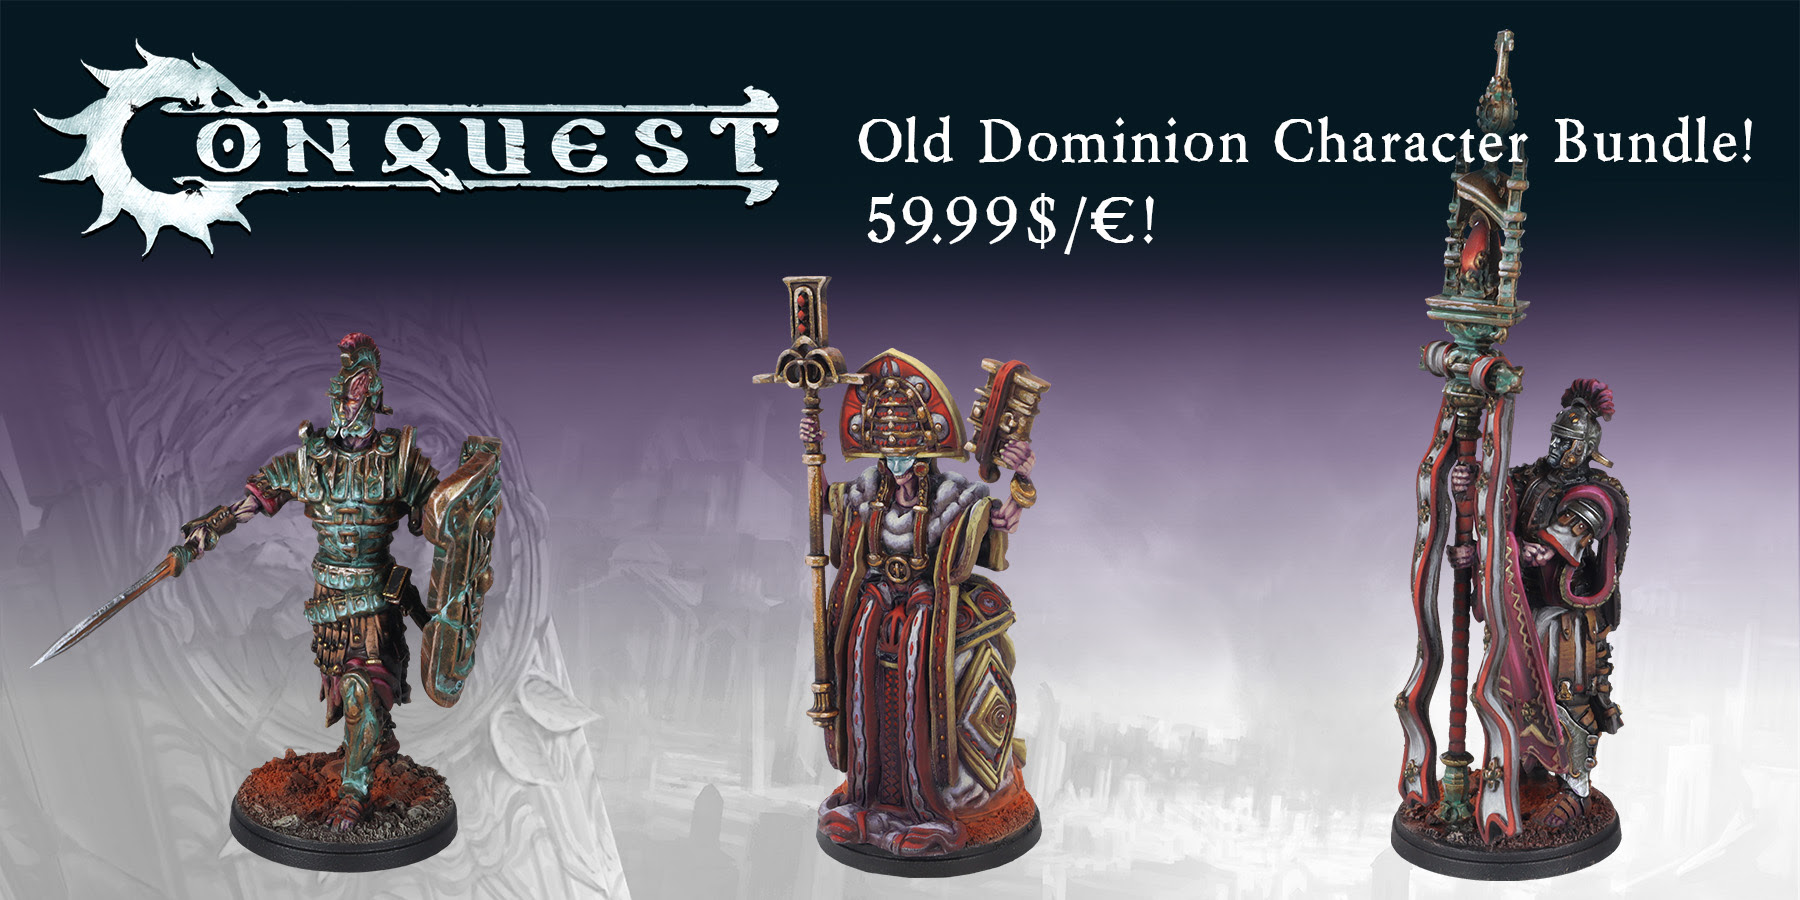 Old Dominion Character Bundle - Conquest